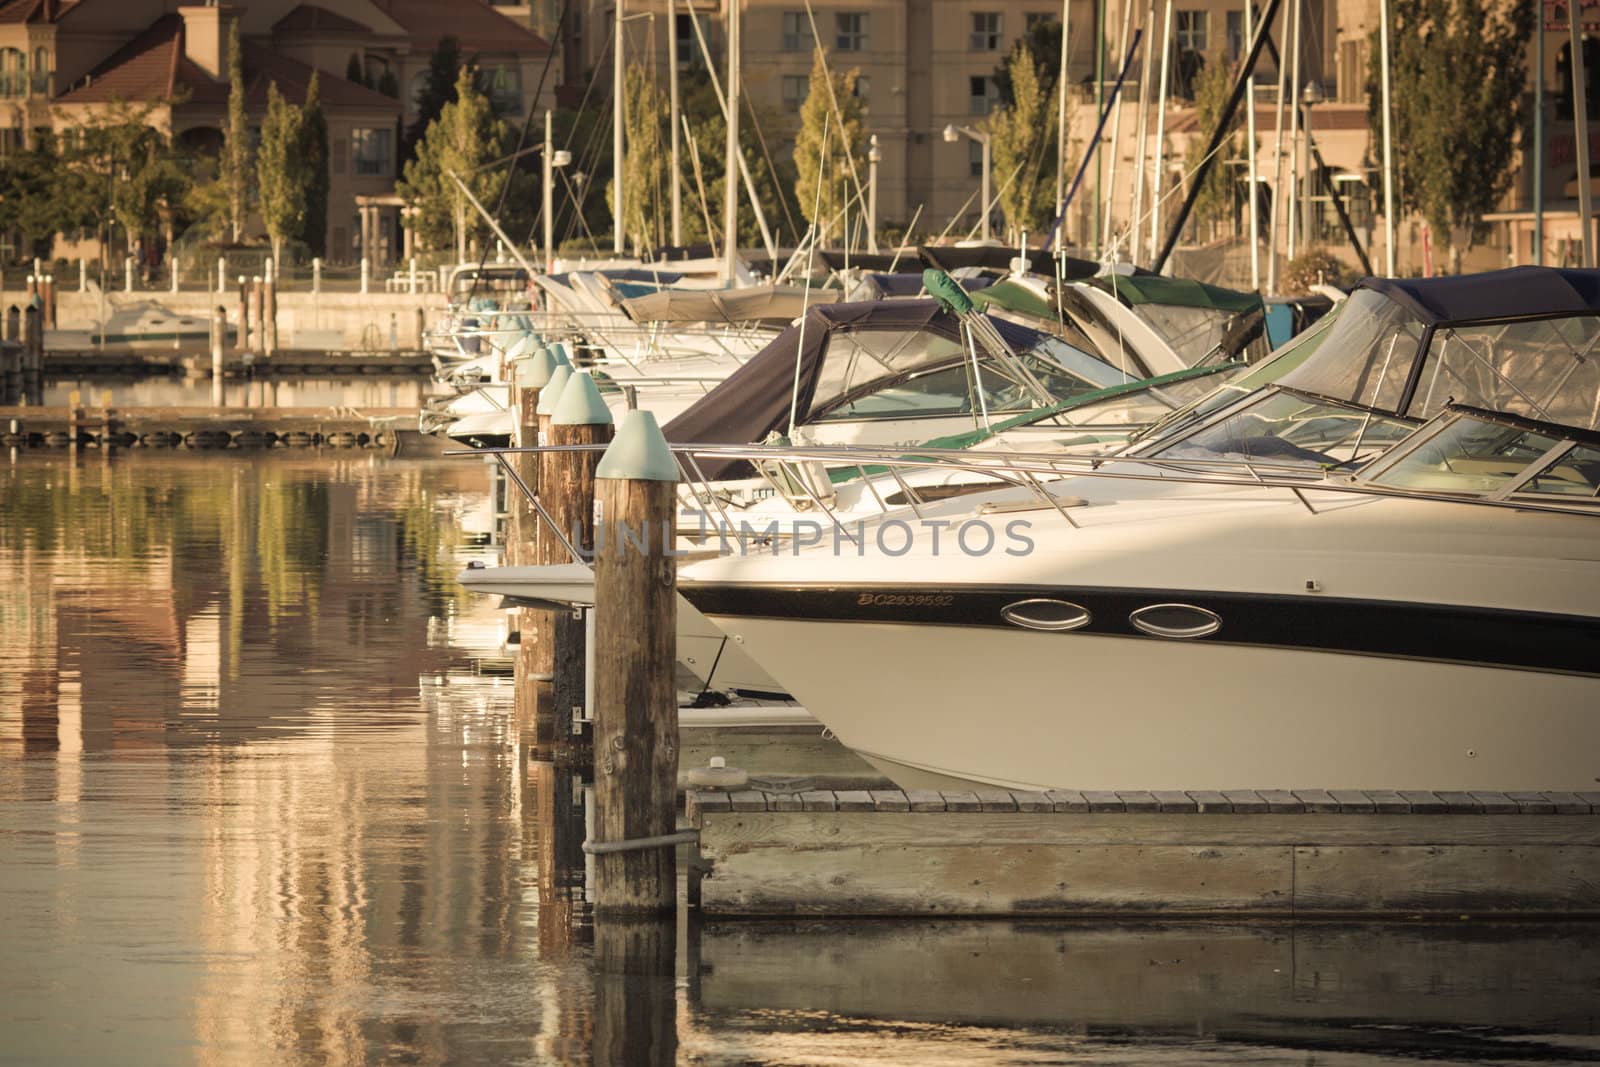 Boats and reflections of yachts in still water